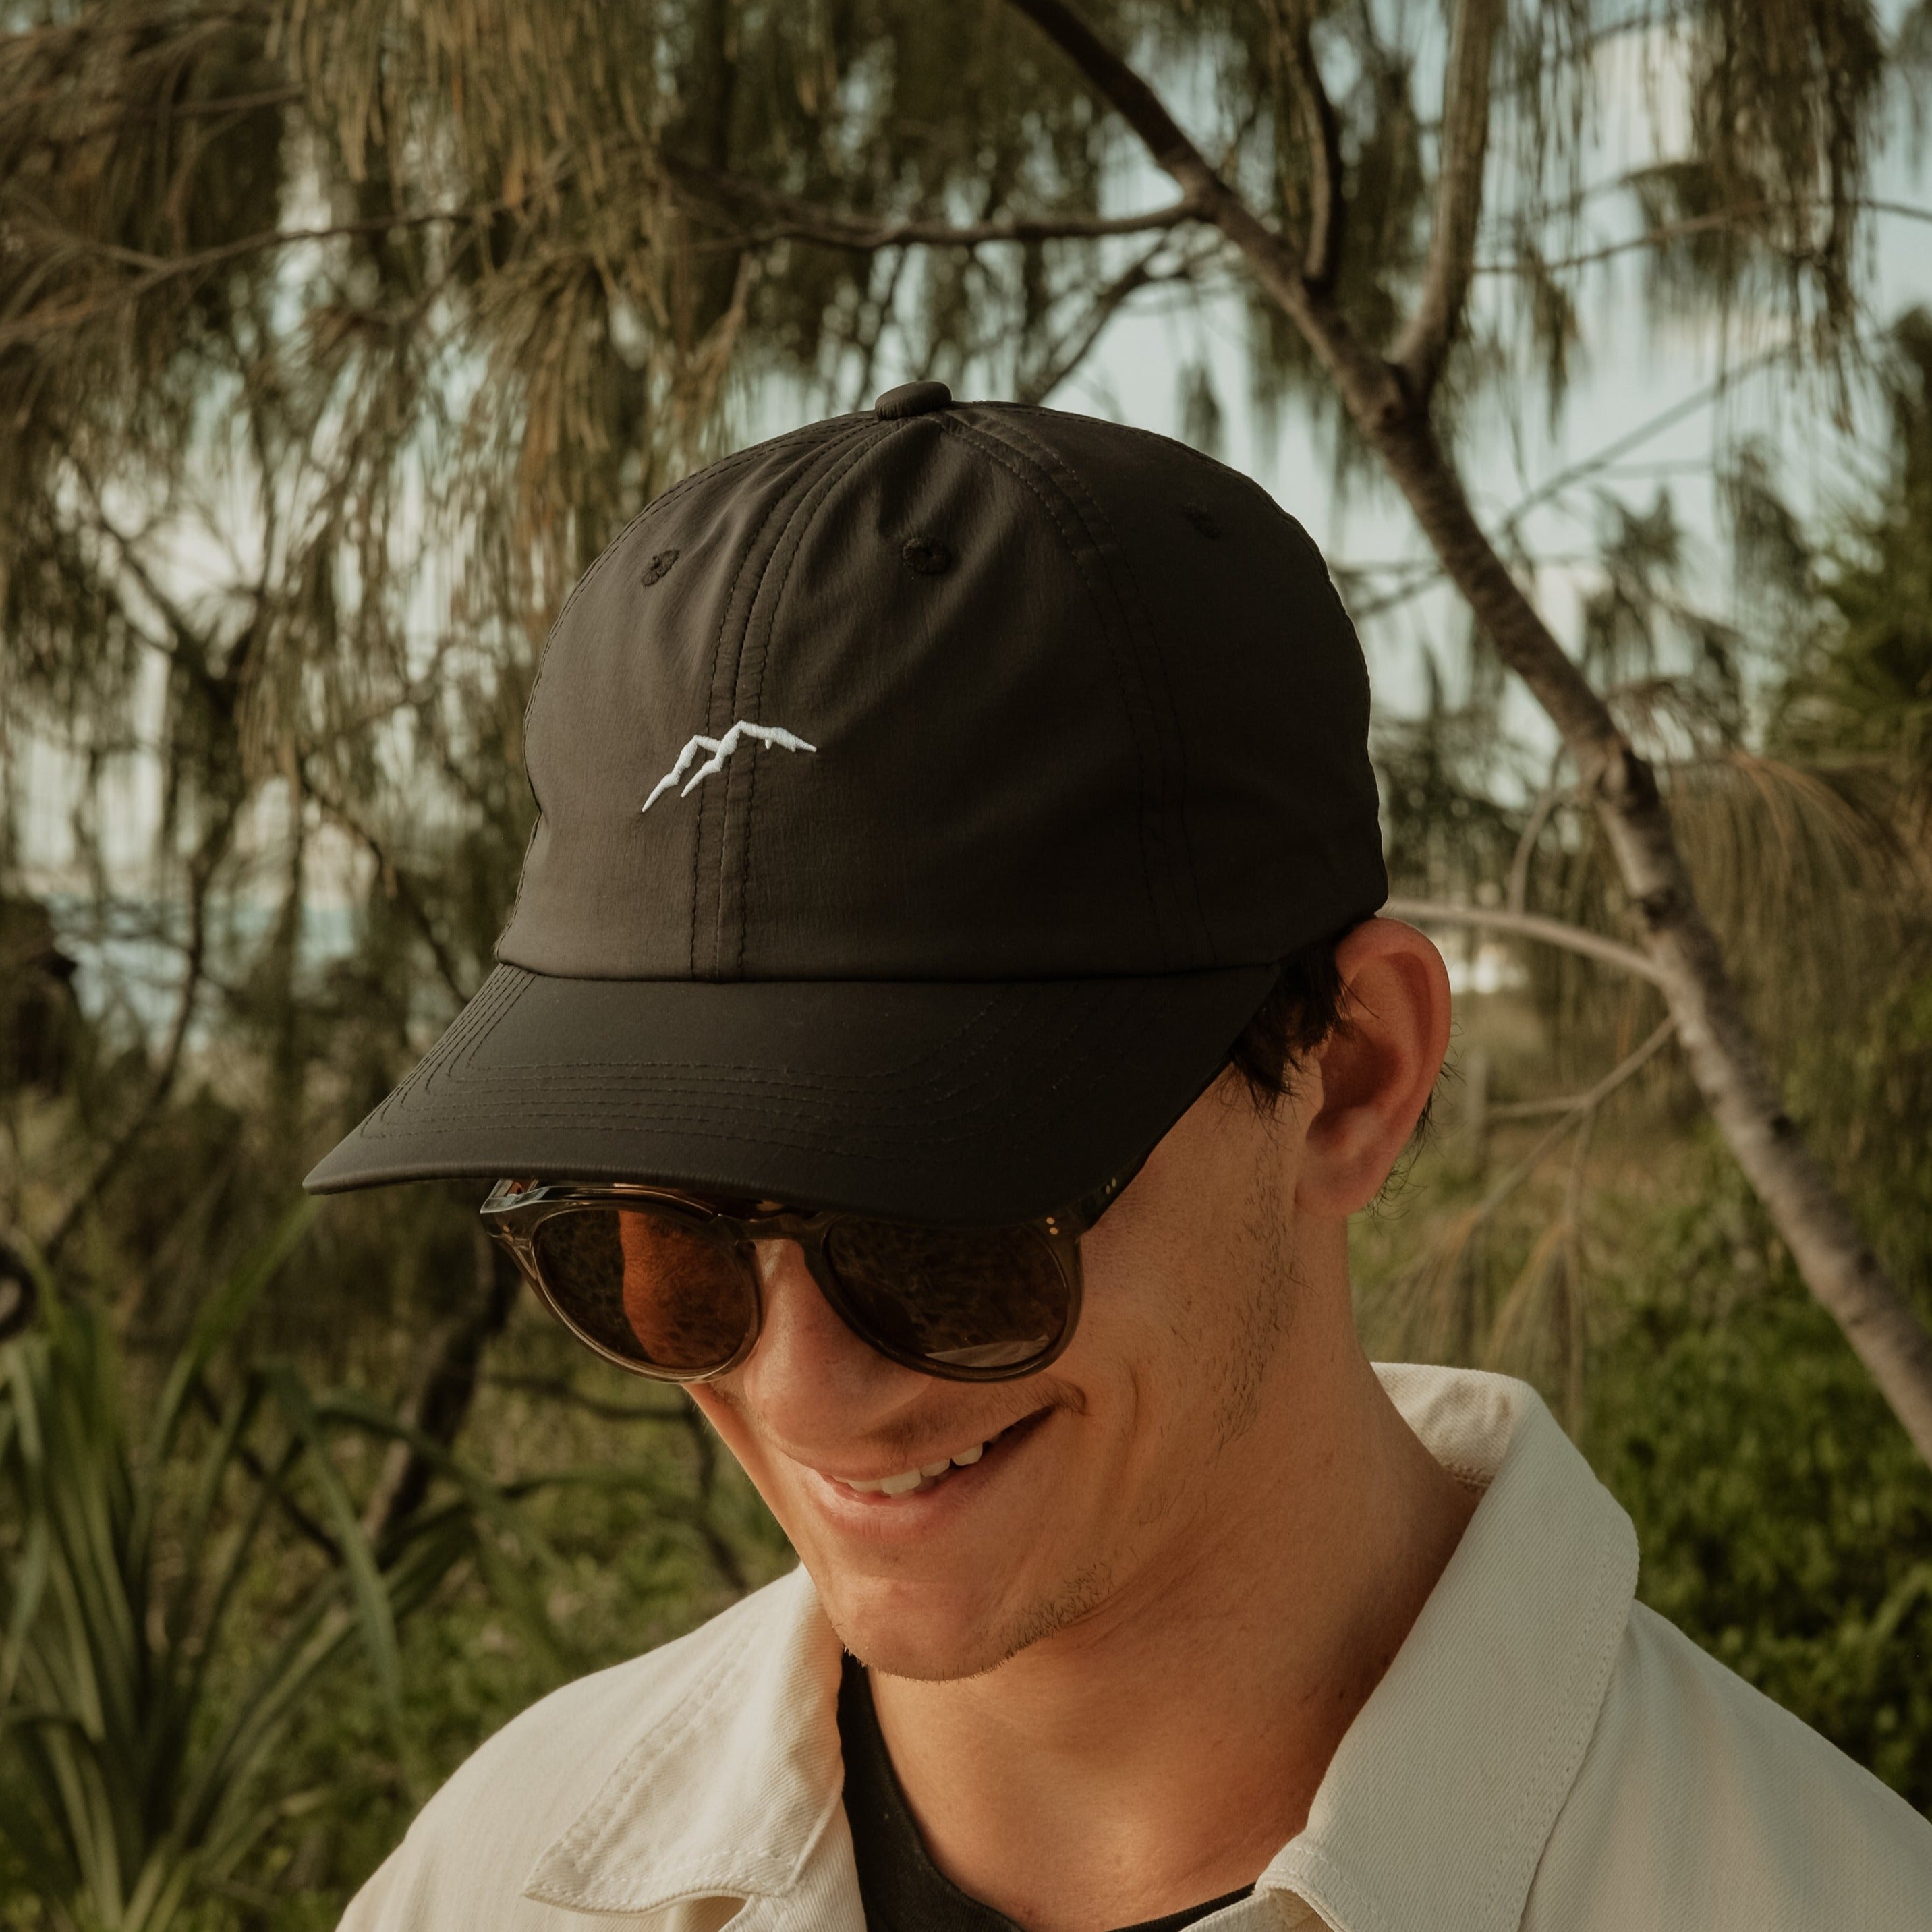 Get Rug'd Dad Cap Black worn by a man in front of palm trees